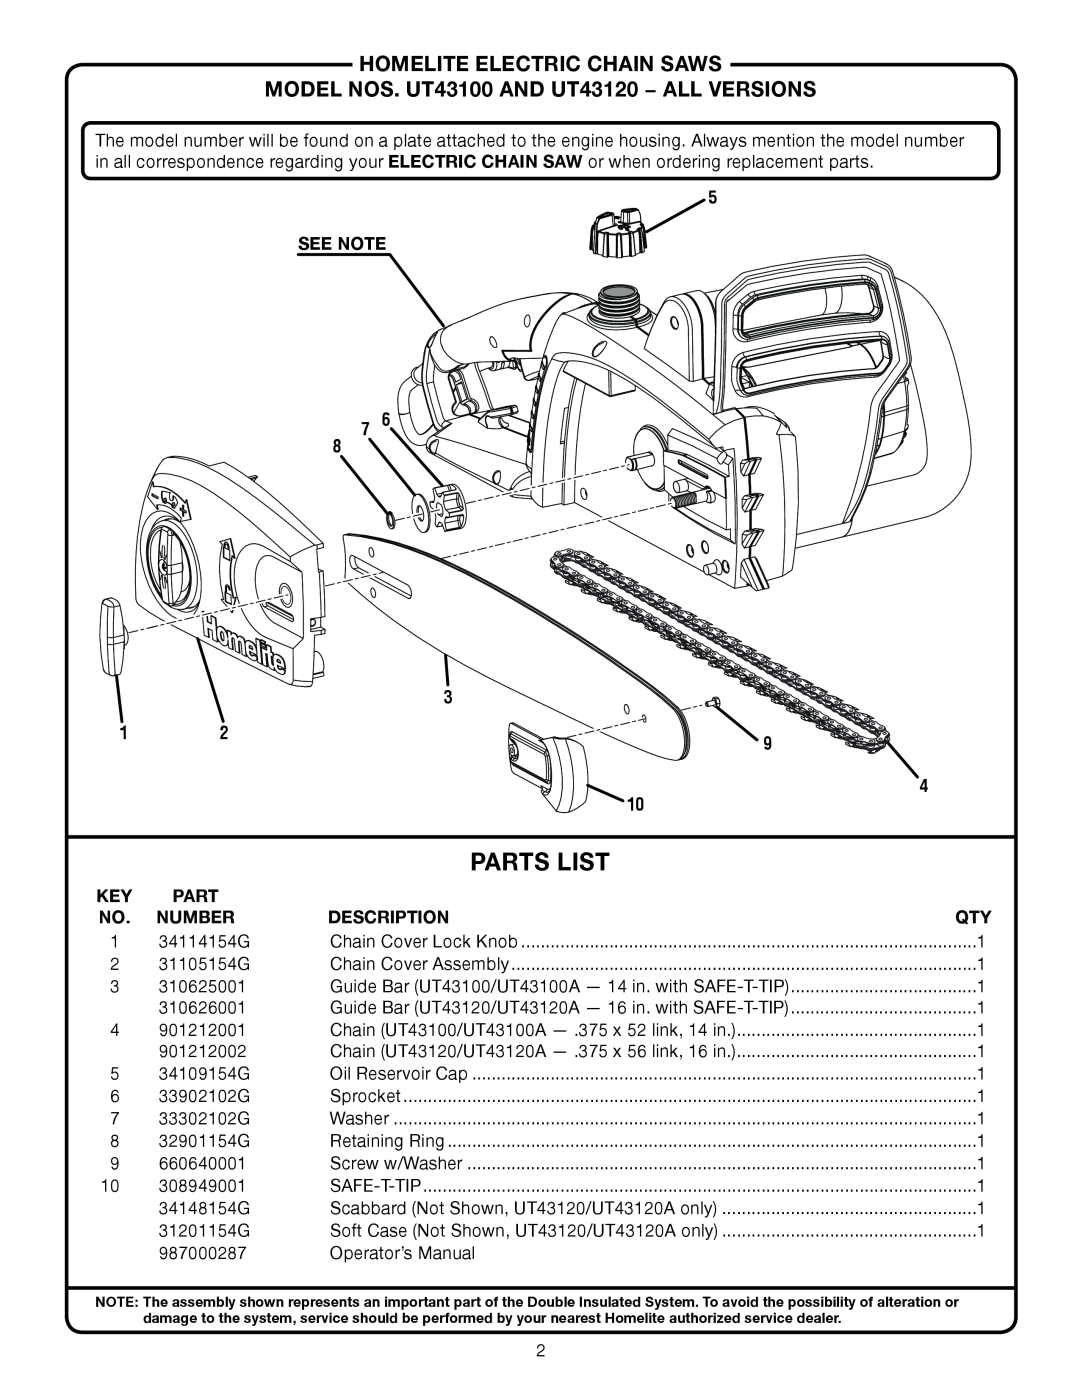 Homelite ut43100 Parts List, homelite electric chain sawS, Model Nos. UT43100 and UT43120 − ALL VERSIONS, See Note, part 